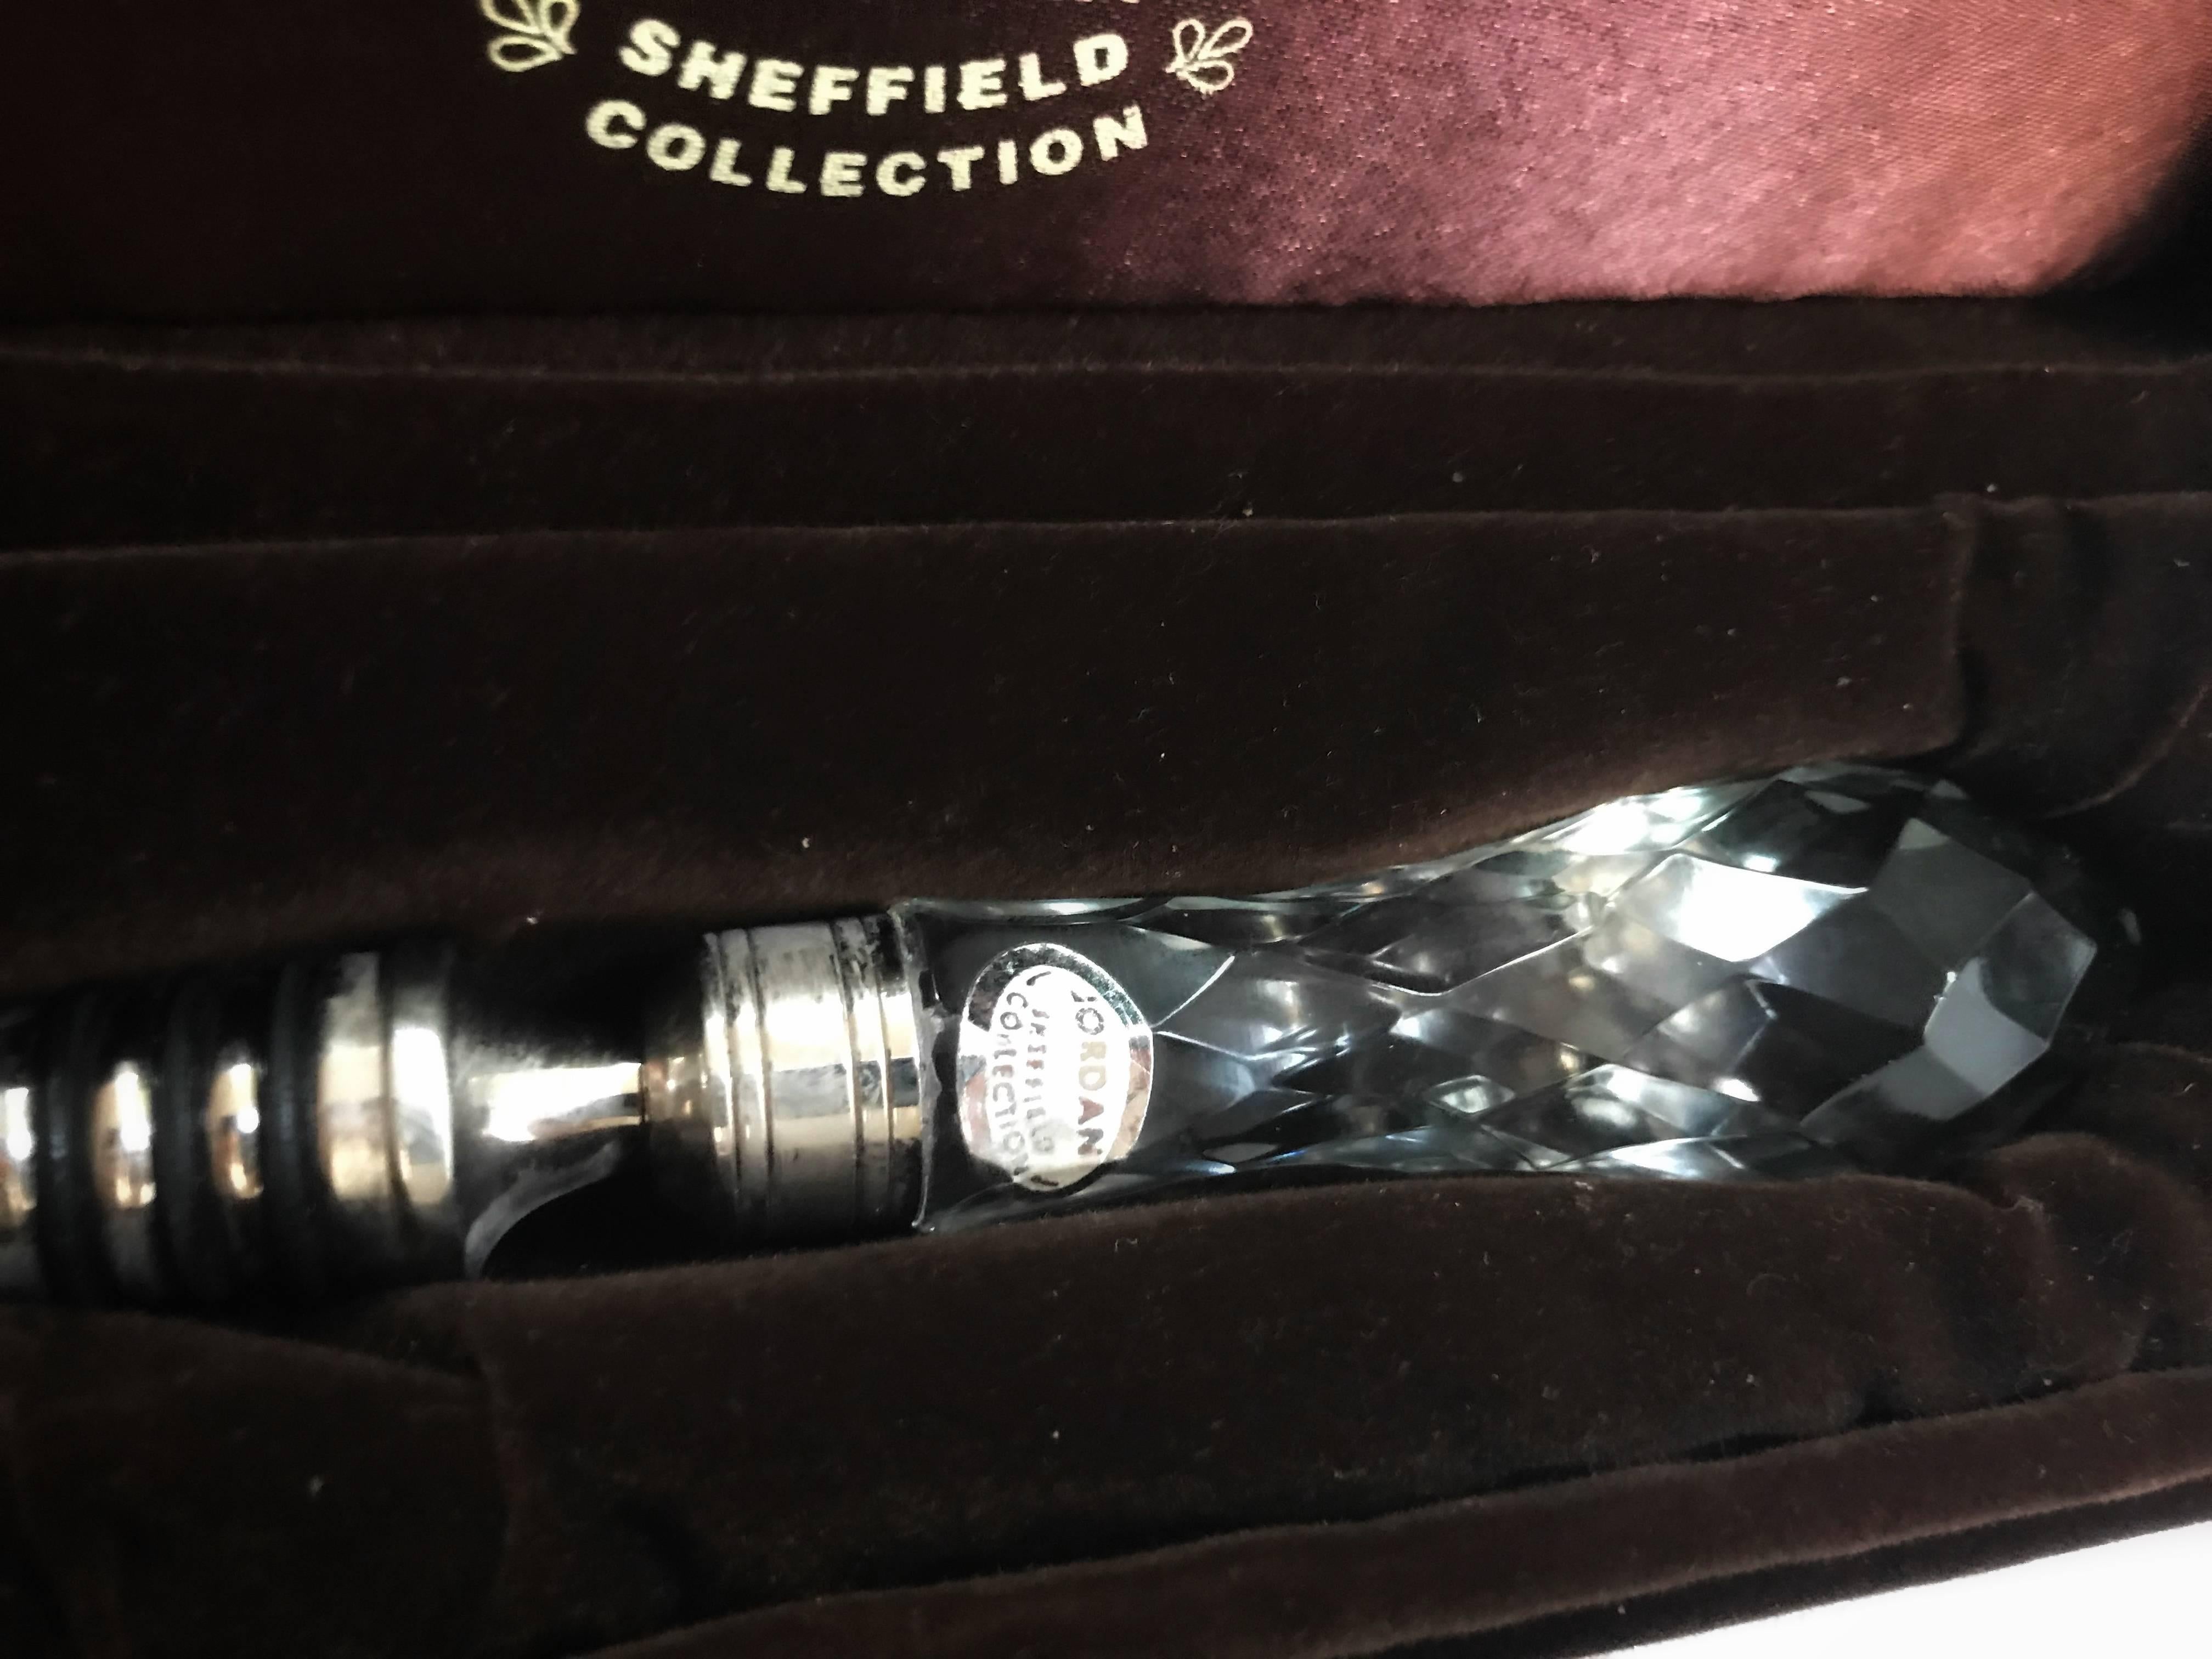 British Sheffield Collection Crystal Stopper